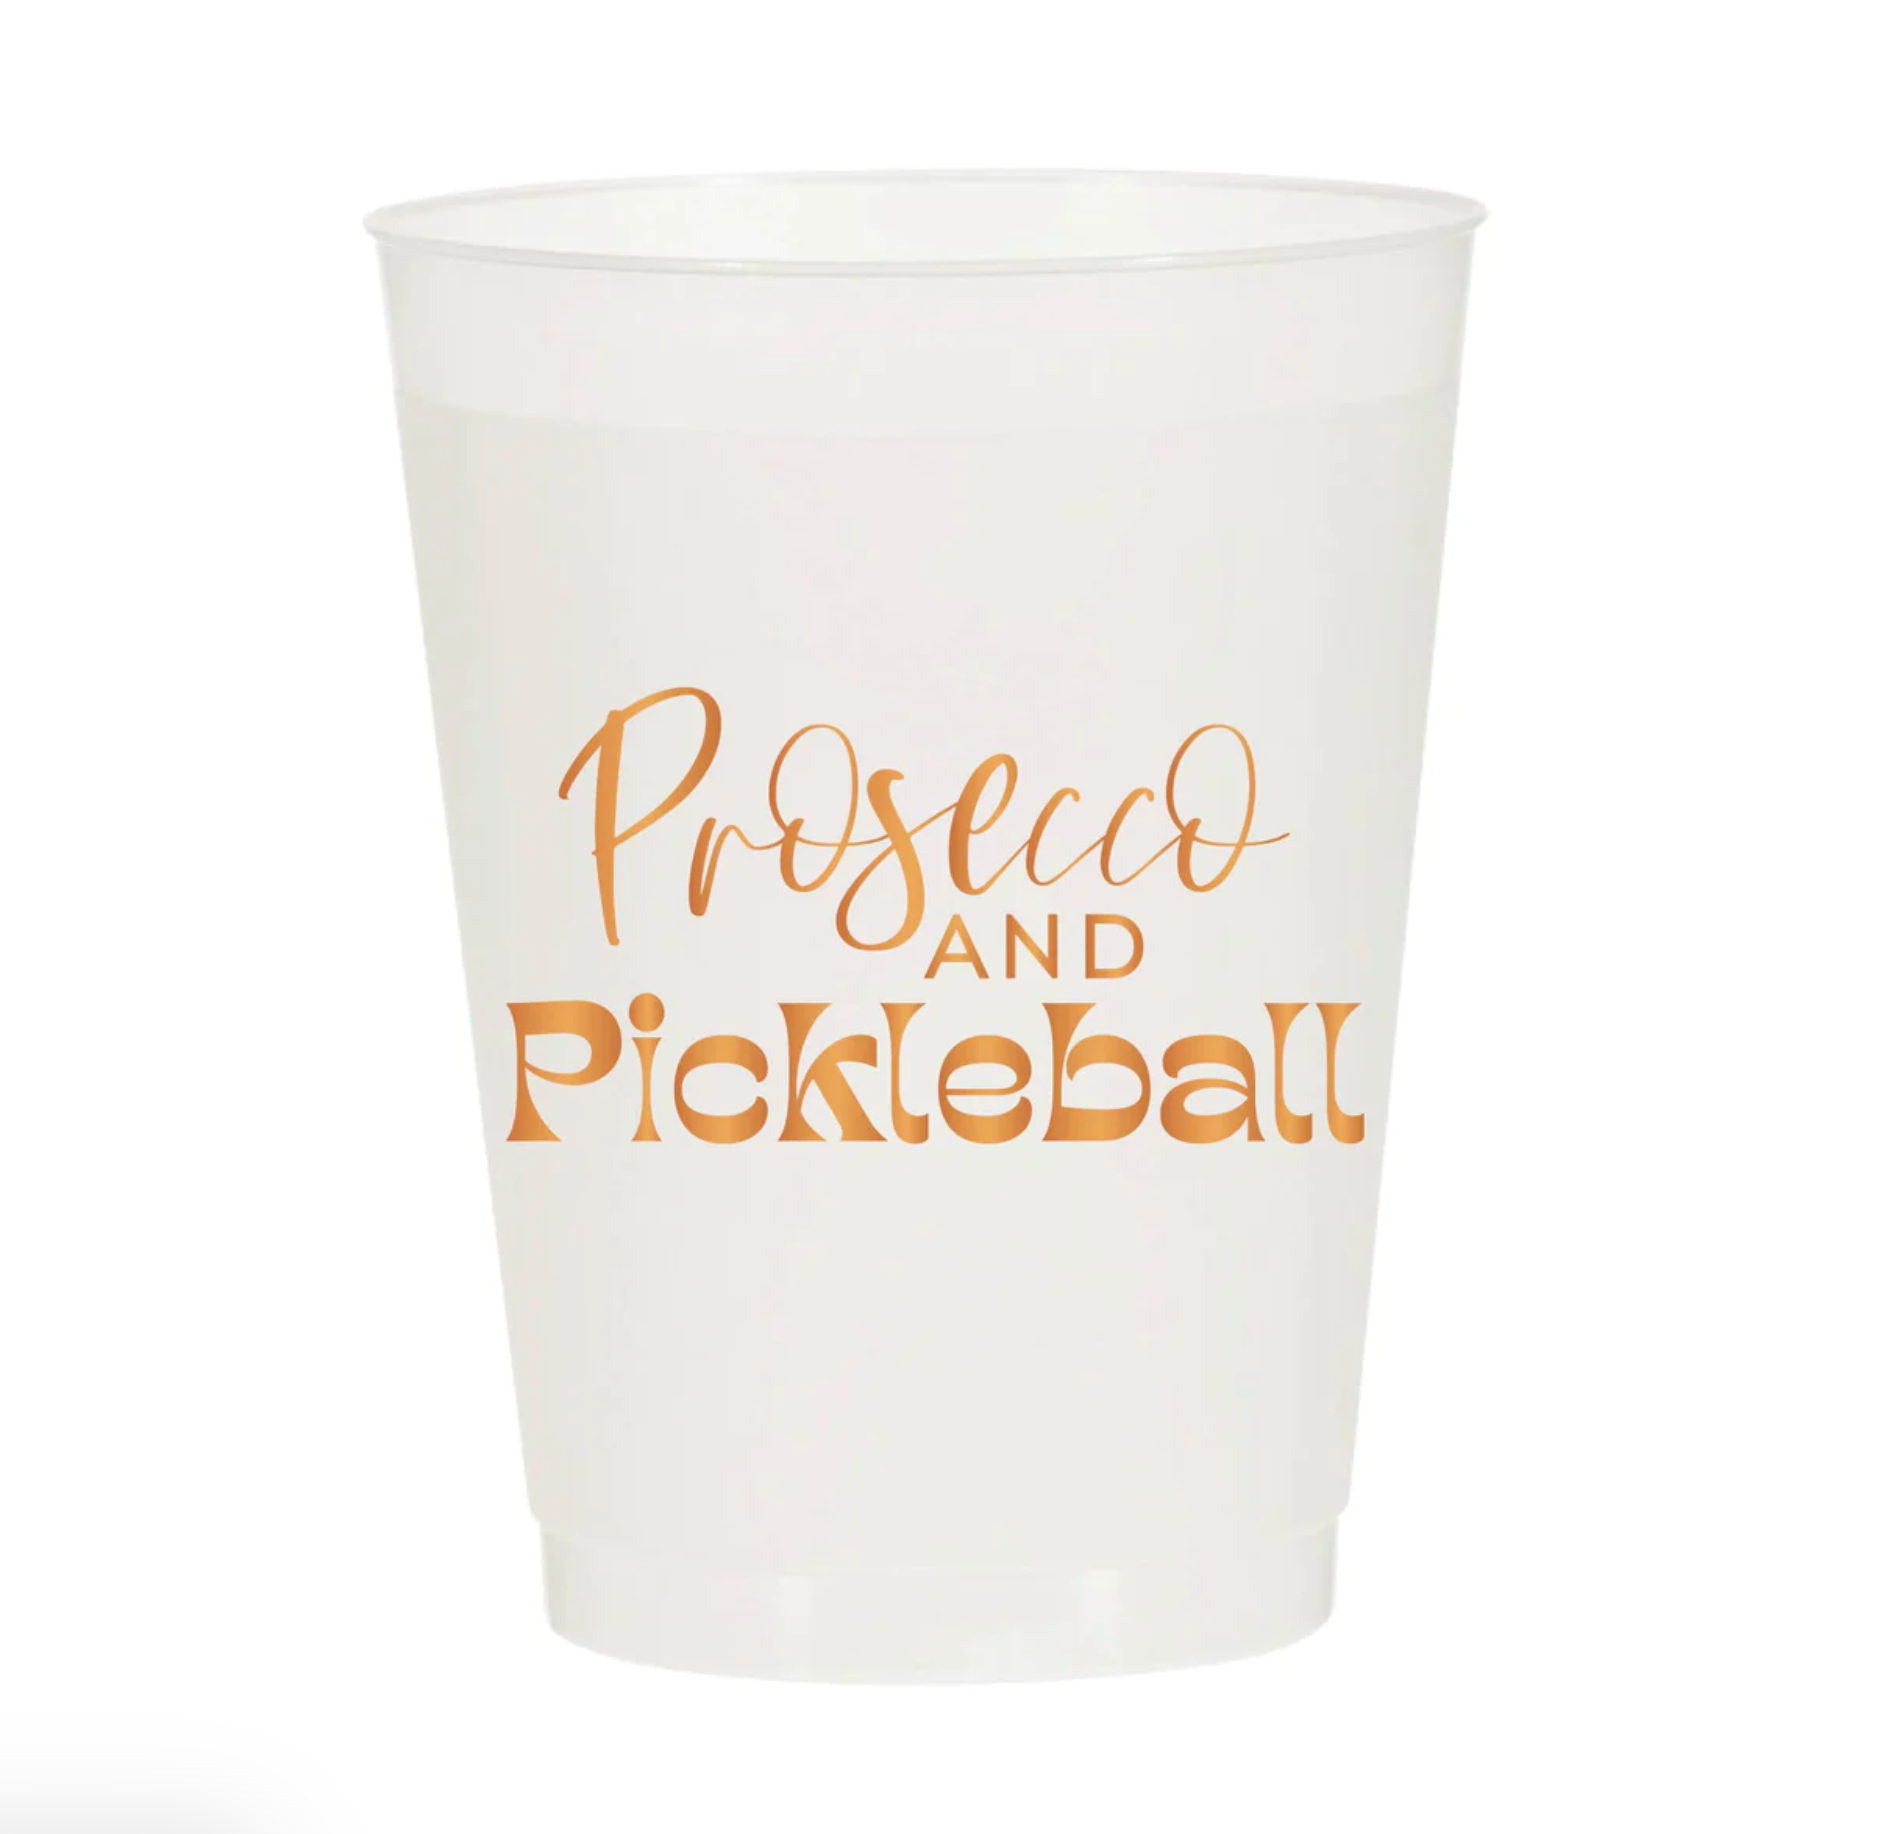 Sip Sip Hooray Prosecco & Pickleball Frosted Cups